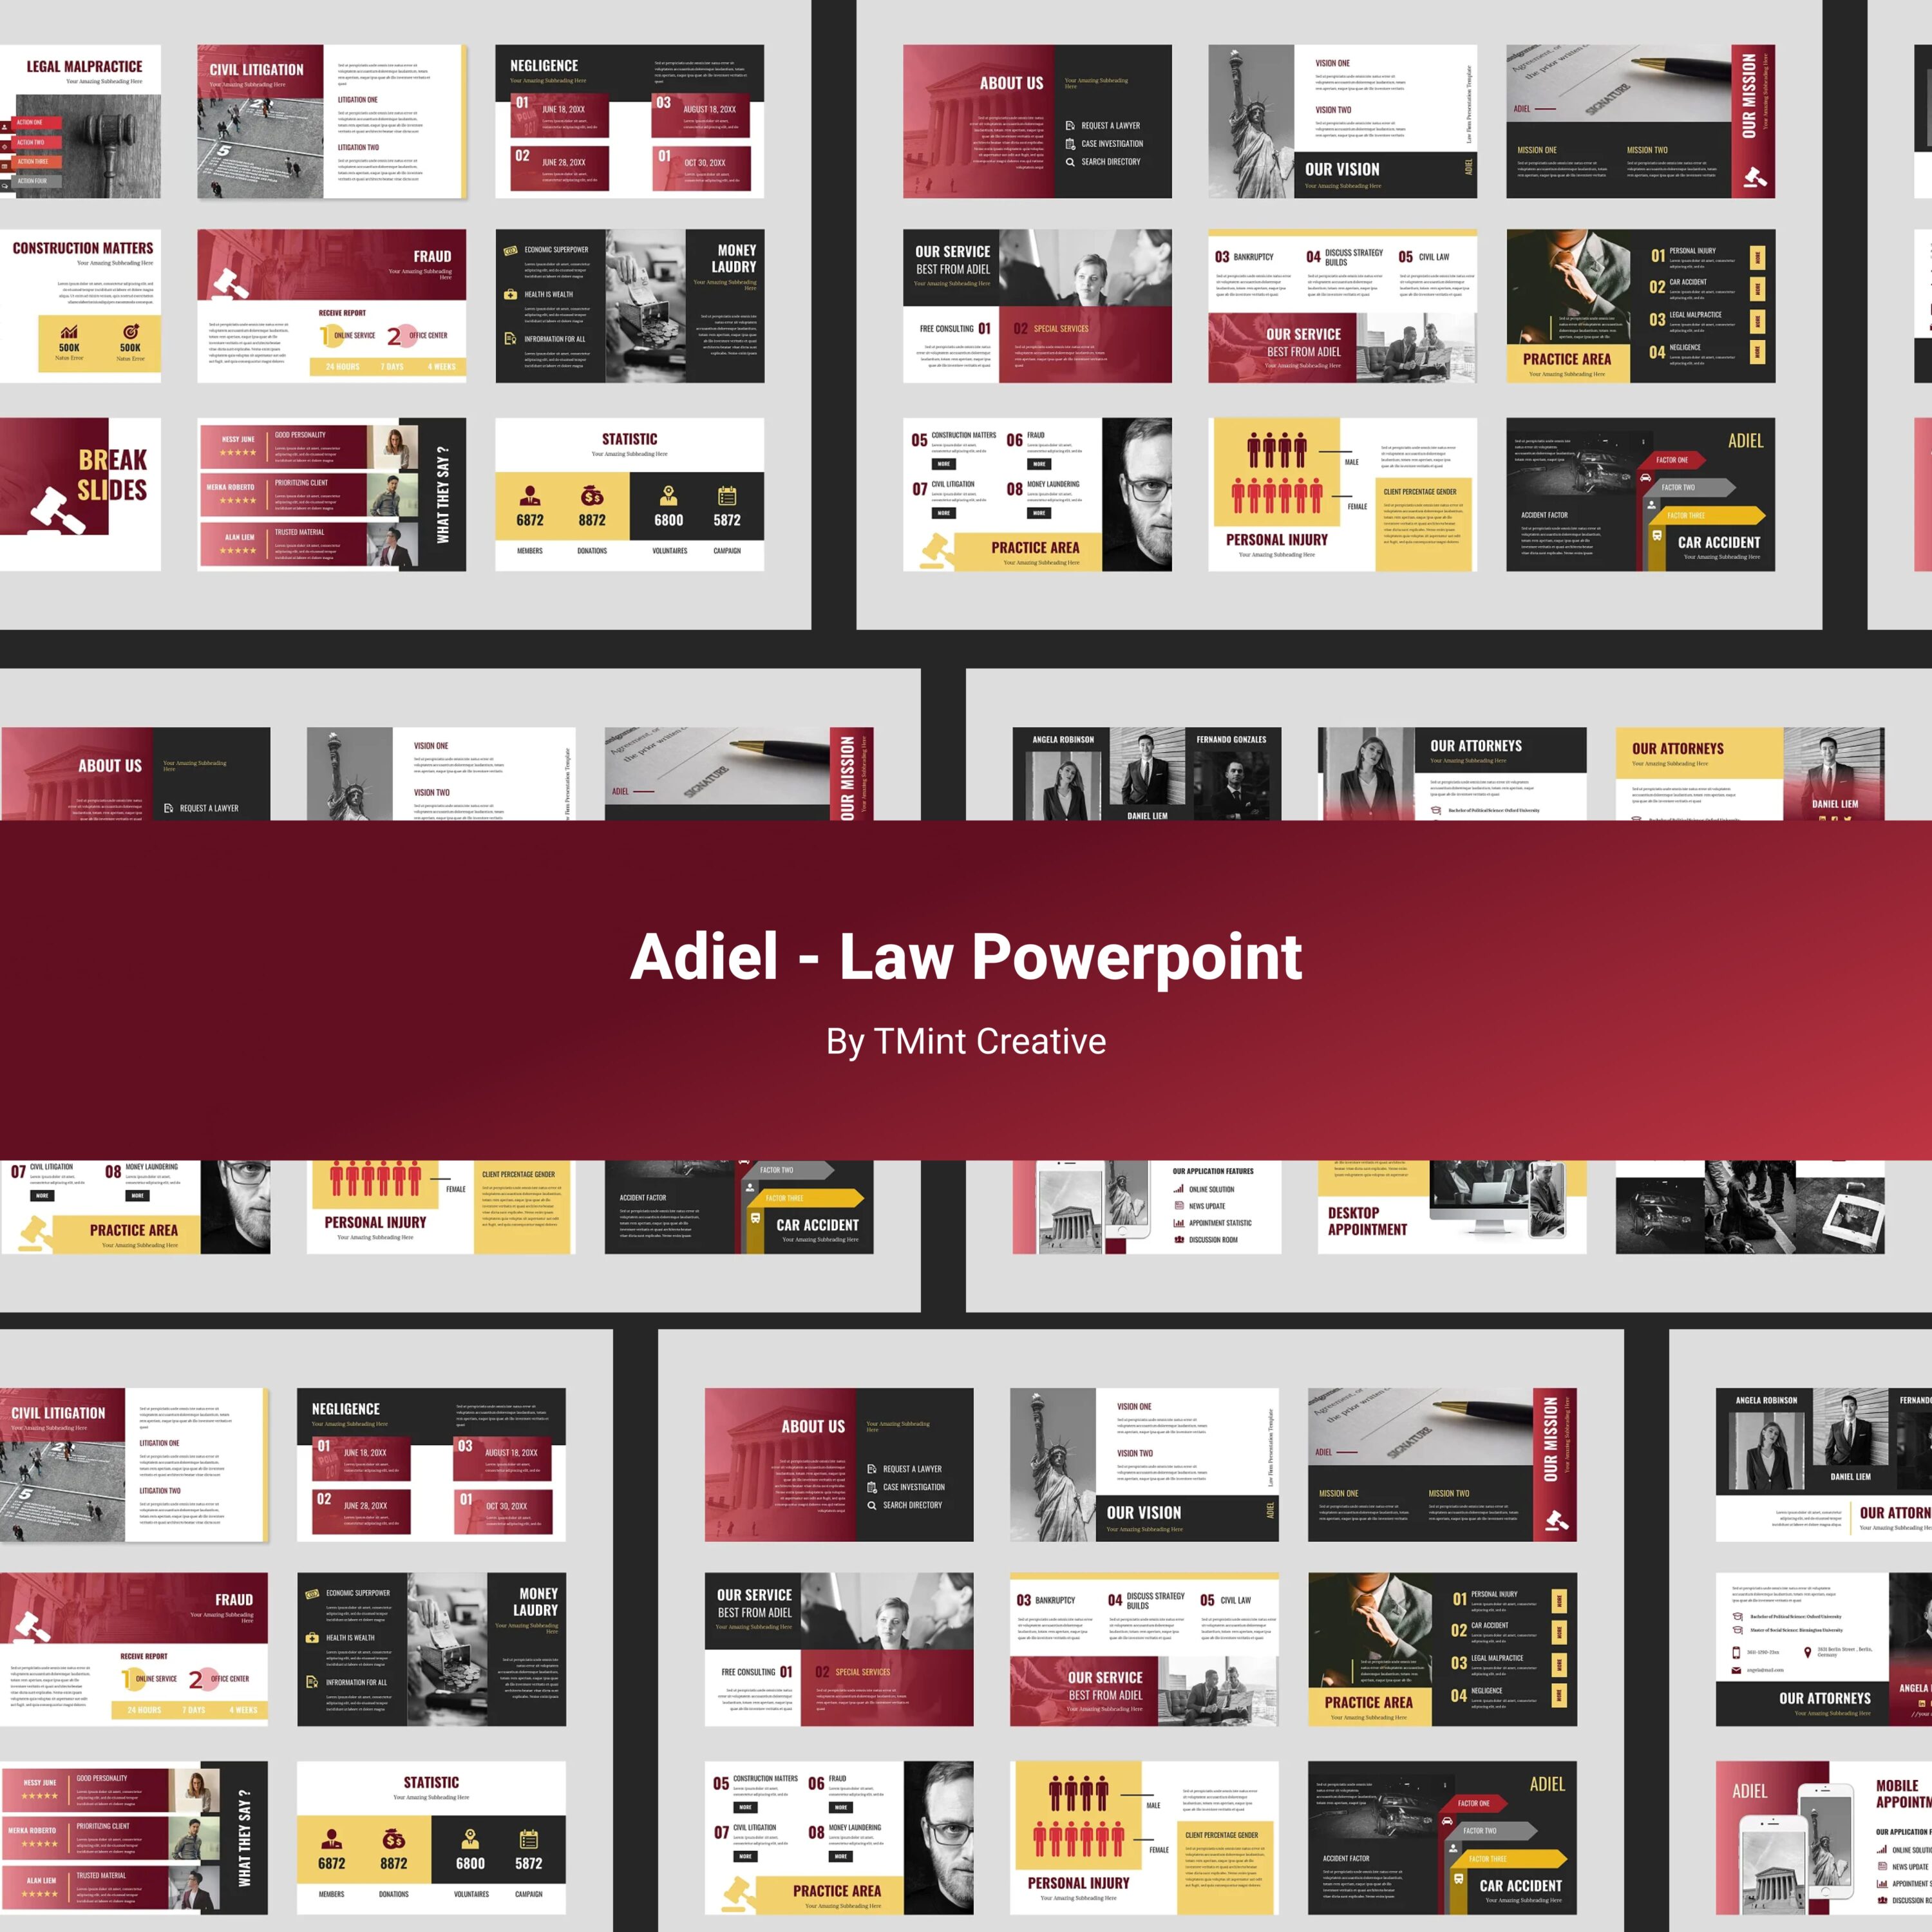 Adiel - Law Powerpoint cover.